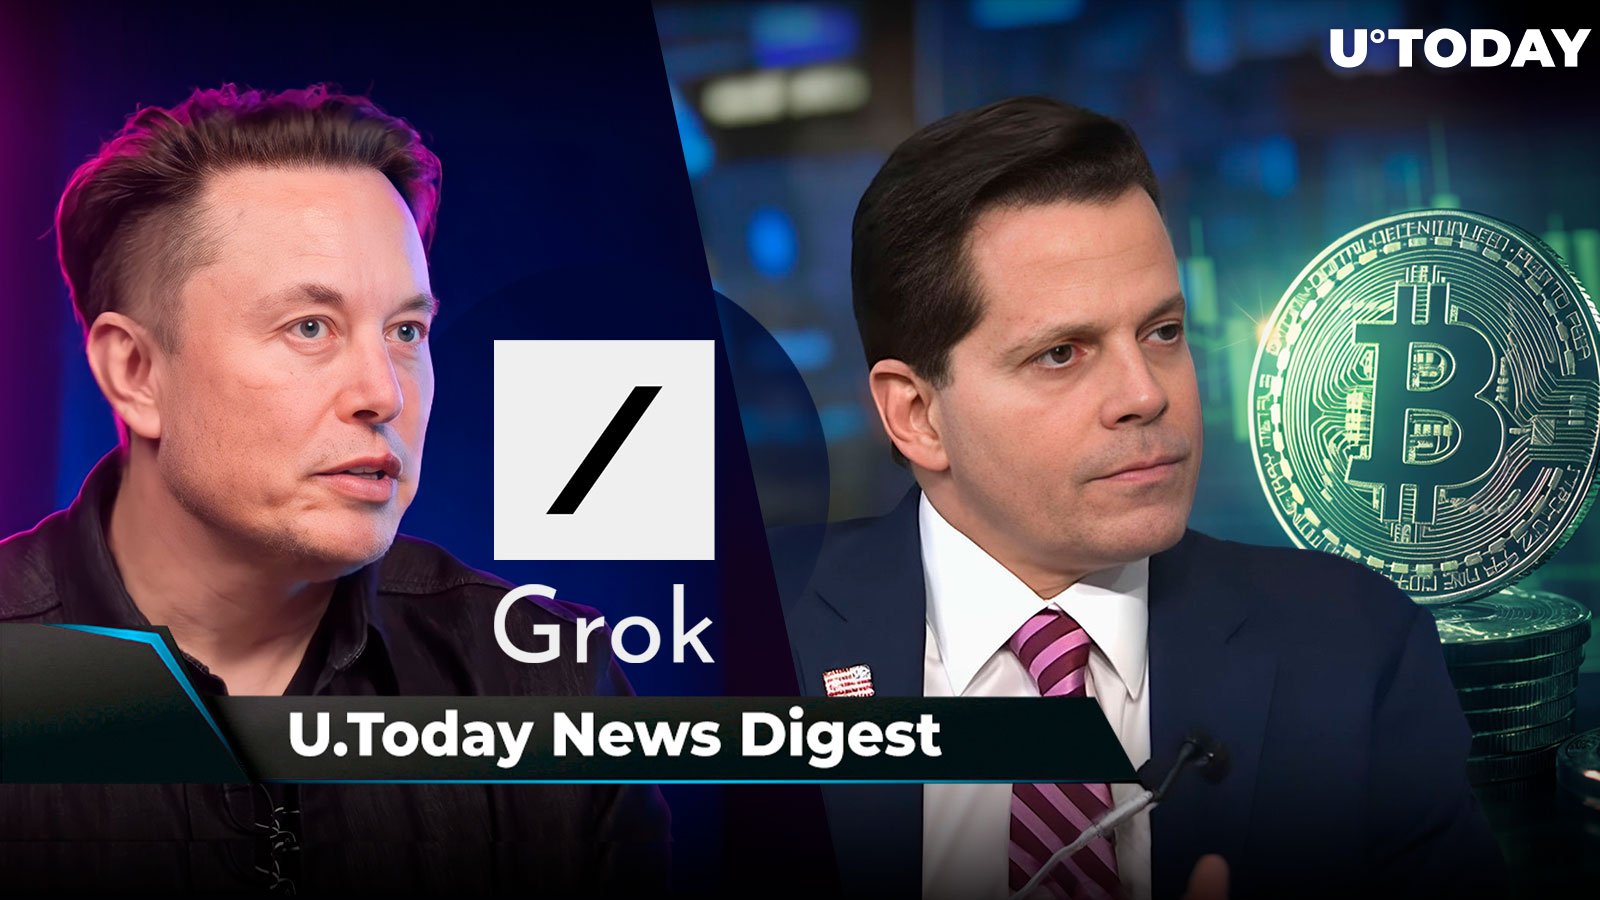 Elon Musk's Grok Now Surpasses ChatGPT-4 Massively, Anthony Scaramucci Shares Epic Bitcoin Price Prediction: Crypto News Digest by U.Today